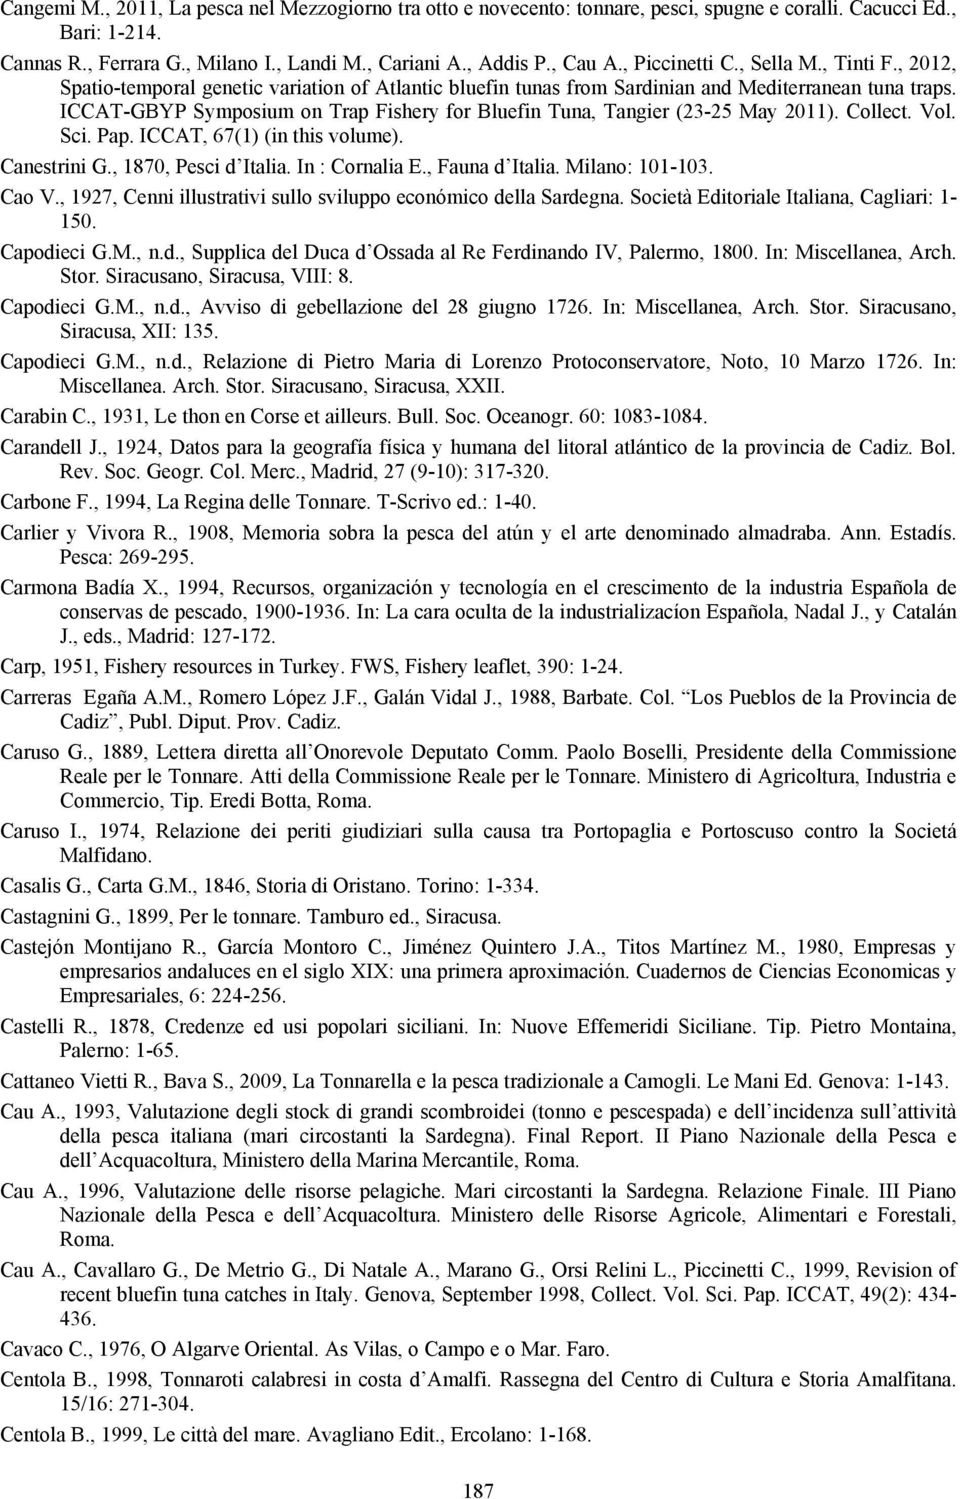 ICCAT-GBYP Symposium on Trap Fishery for Bluefin Tuna, Tangier (23-25 May 2011). Collect. Vol. Sci. Pap. ICCAT, 67(1) (in this volume). Canestrini G., 1870, Pesci d Italia. In : Cornalia E.